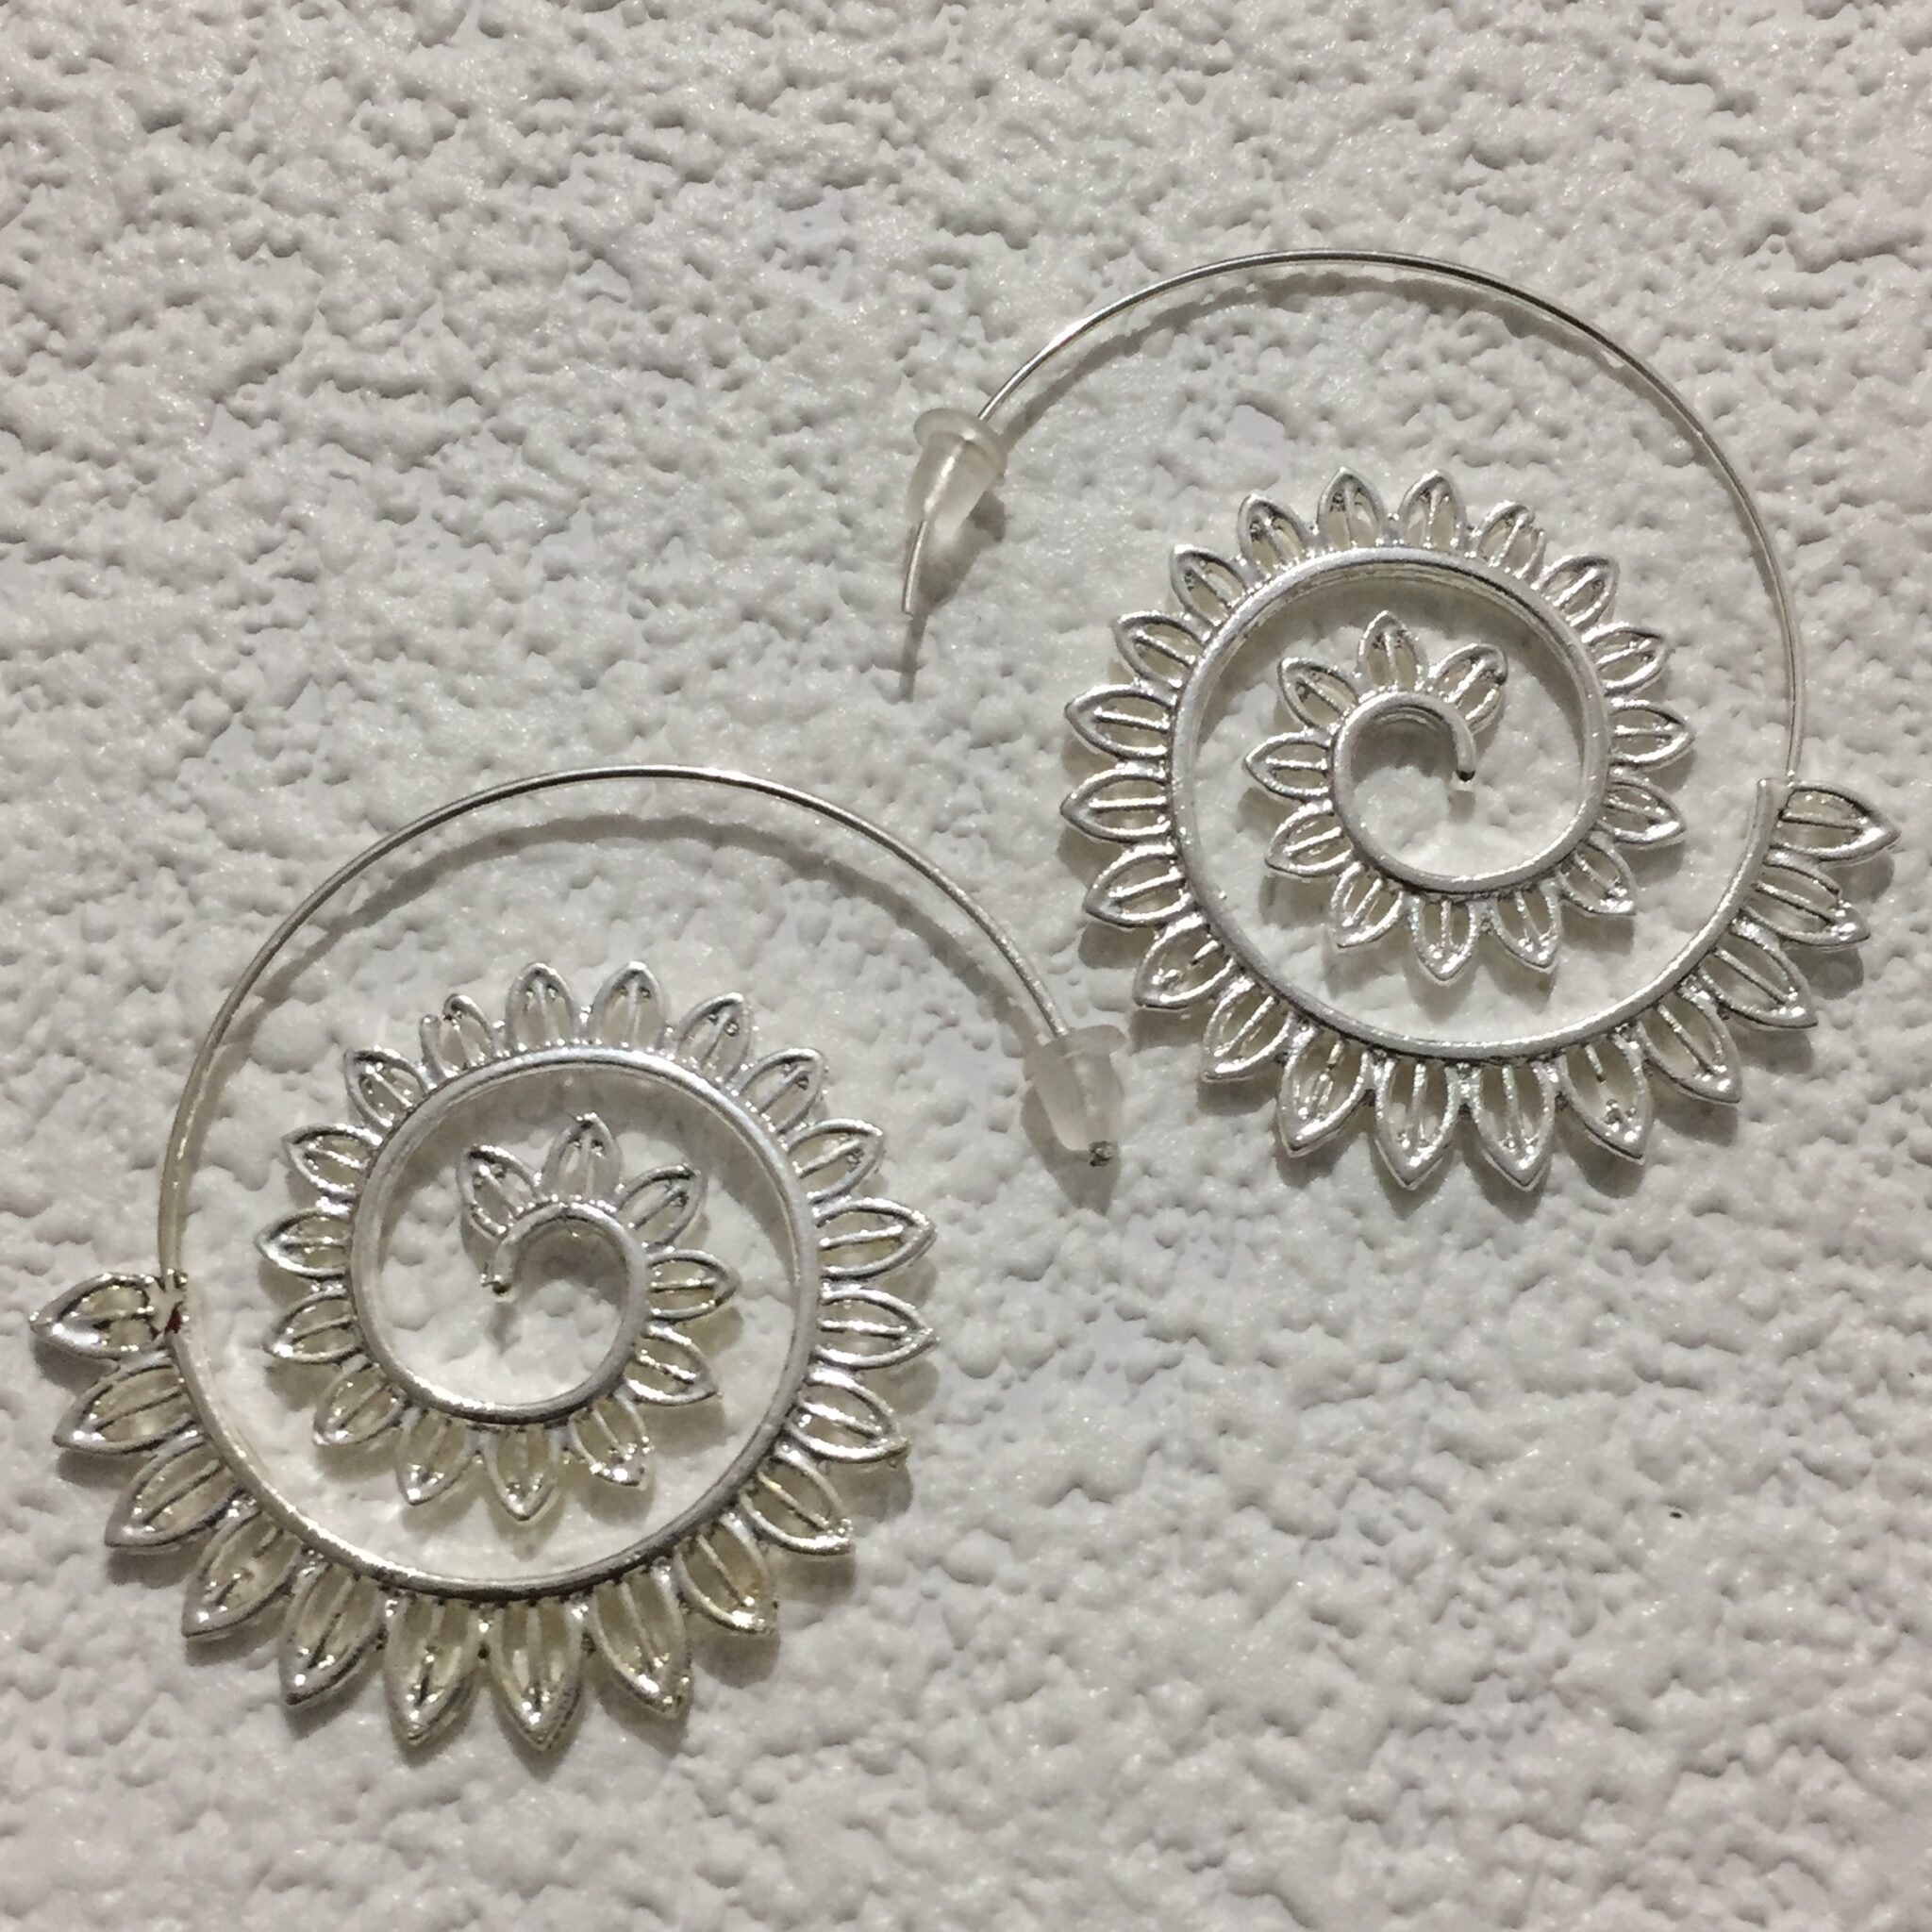 Gorgeous pair of Silver Plated Tribal Ethnic Twist Spiral Hippy Boho Festival Earrings - Style 11